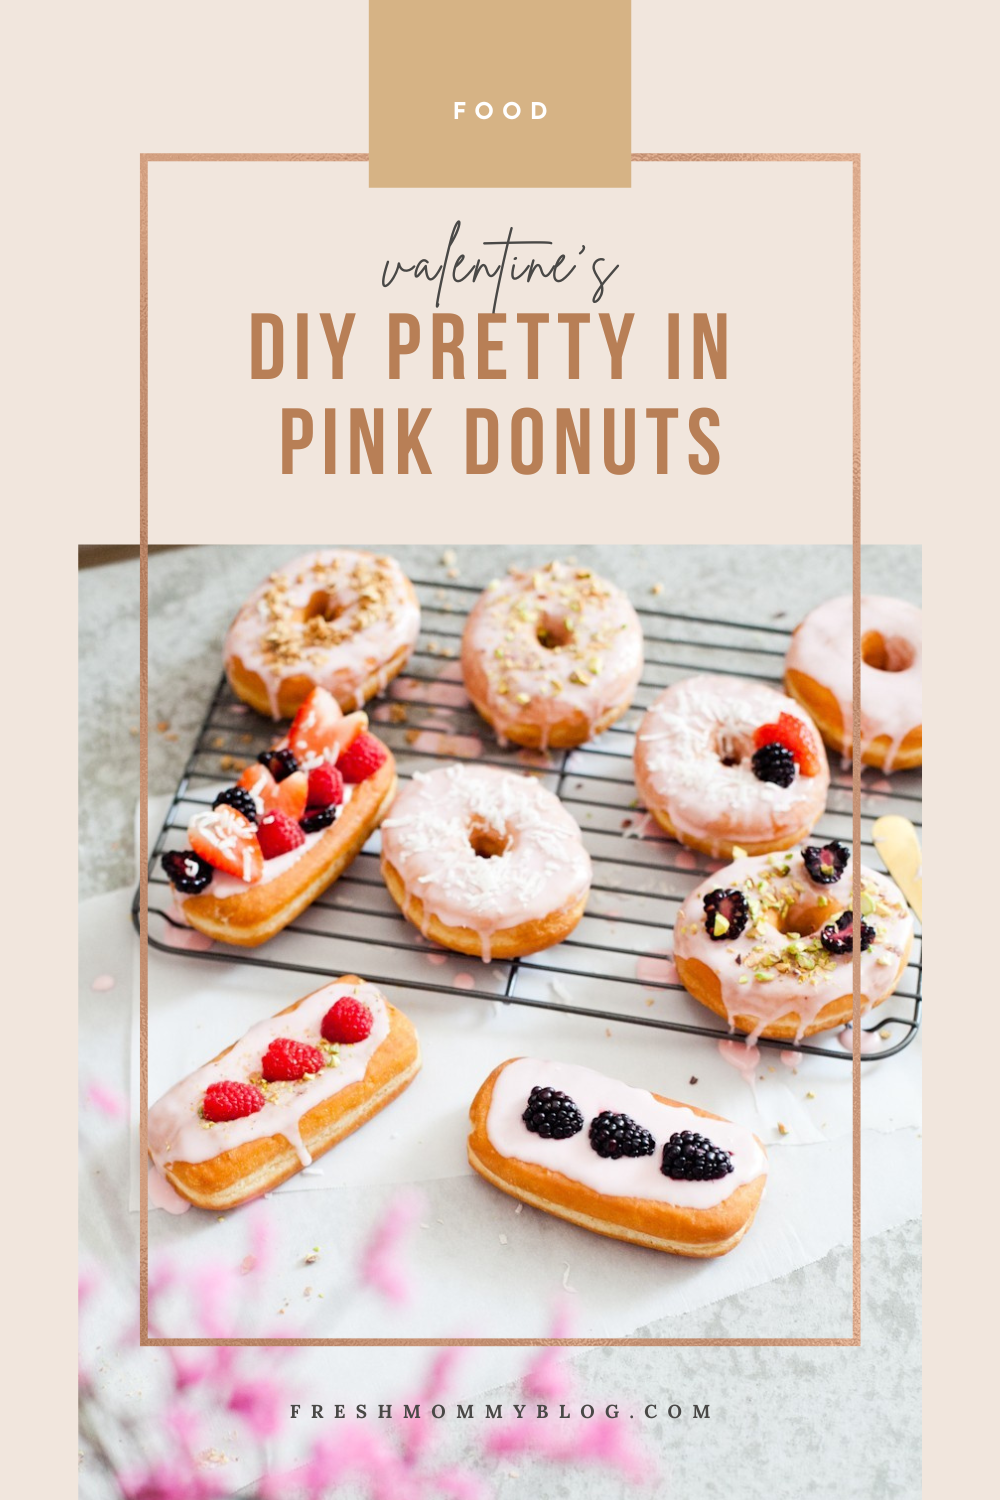 Valentine's DIY Pretty Pink Donuts - the perfect Valentine's Breakfast to show your love.